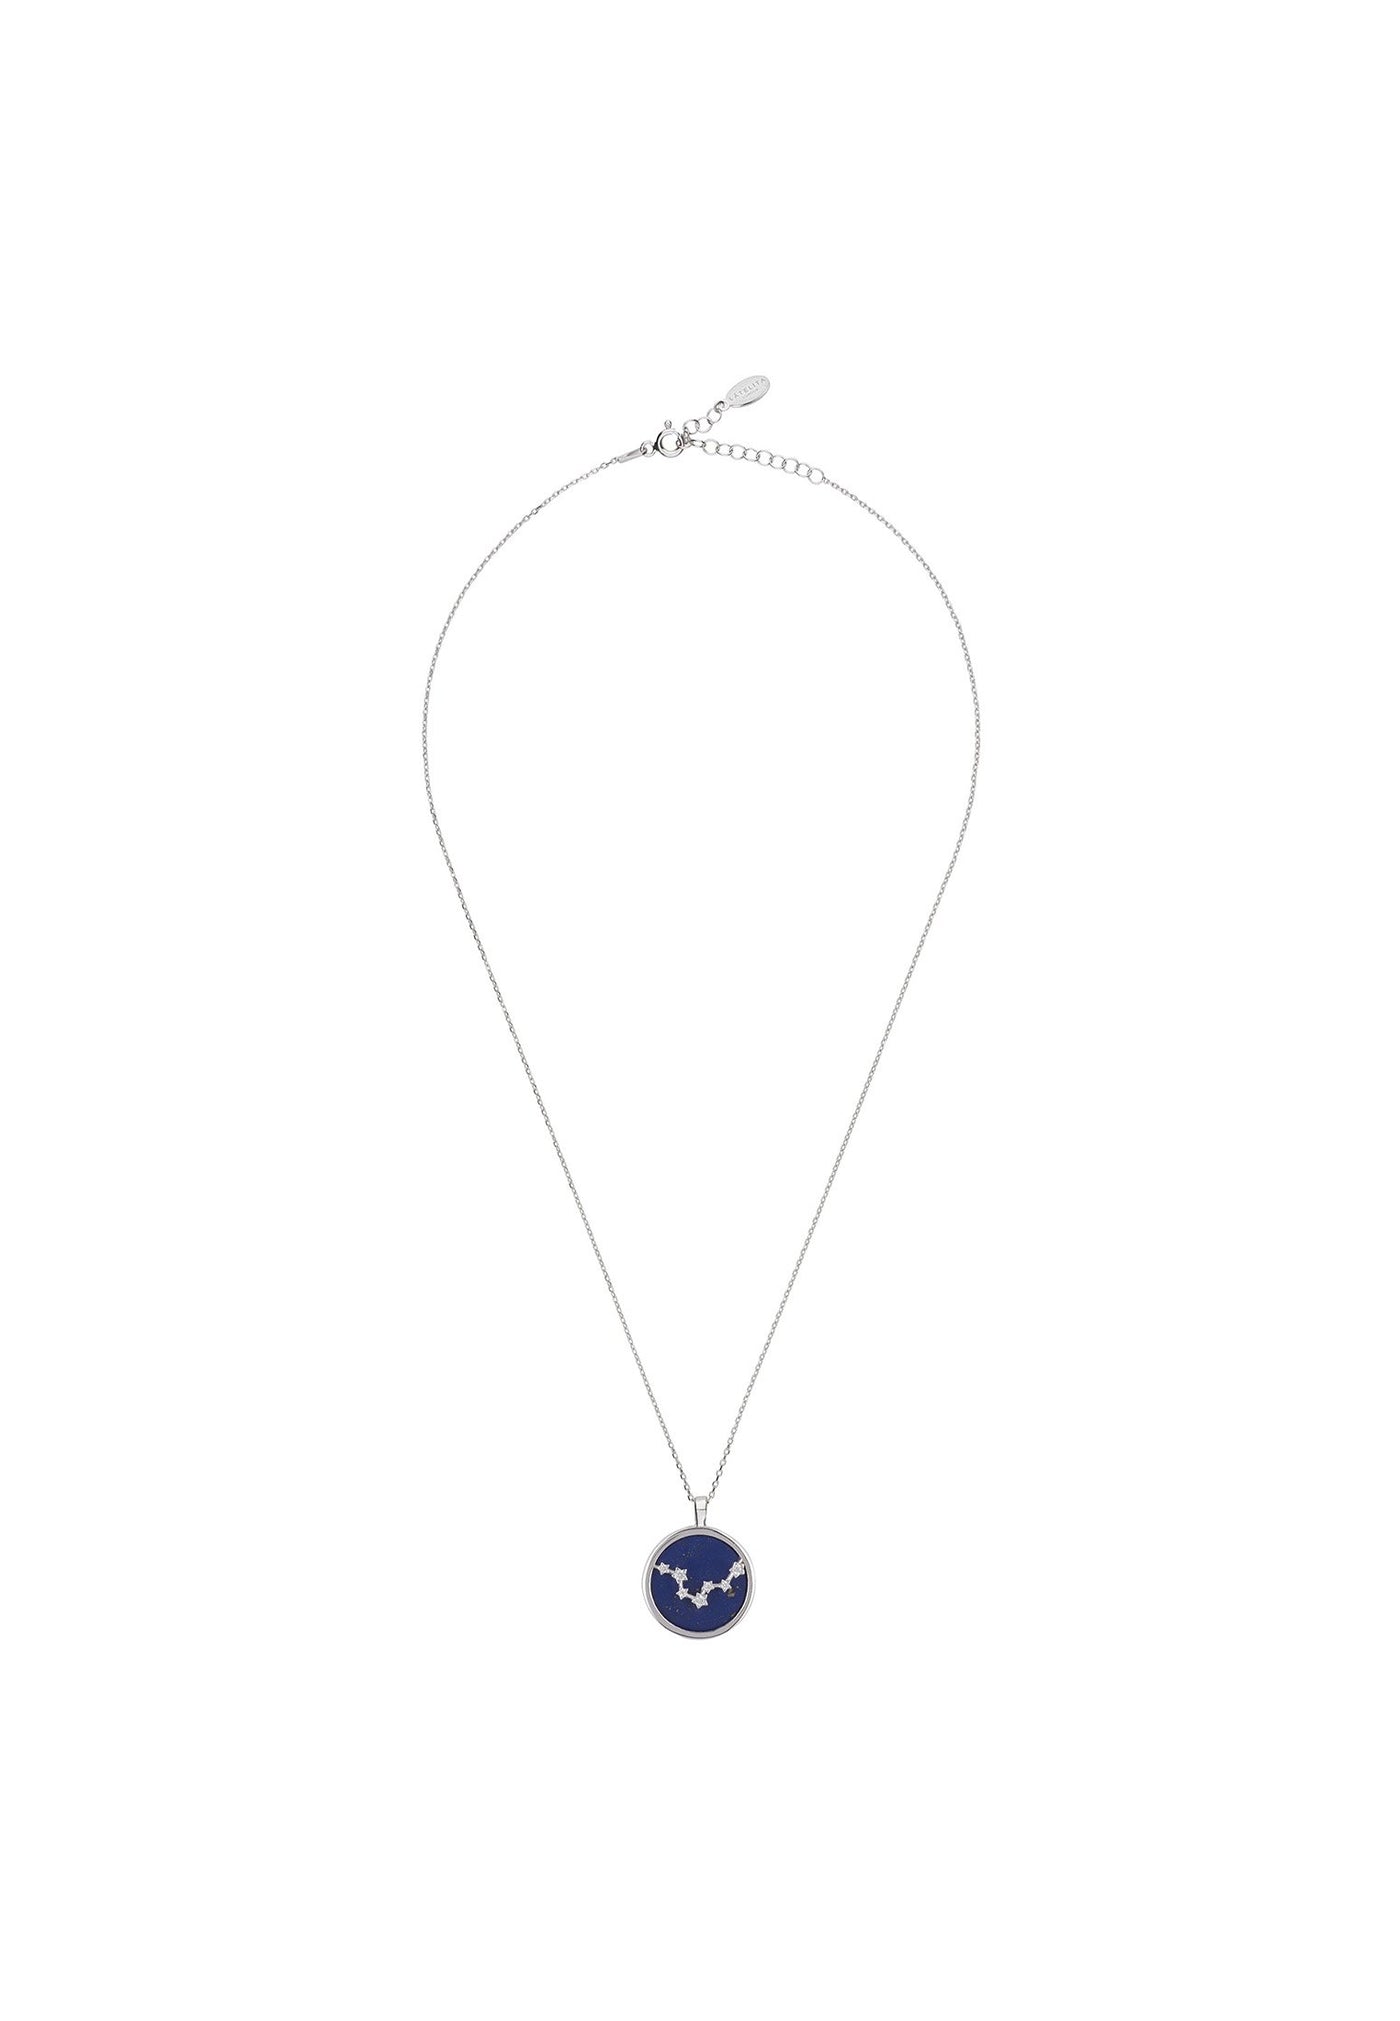 Pisces - Necklace - 925 Sterling silver - Lapis lazuli with white zirconia